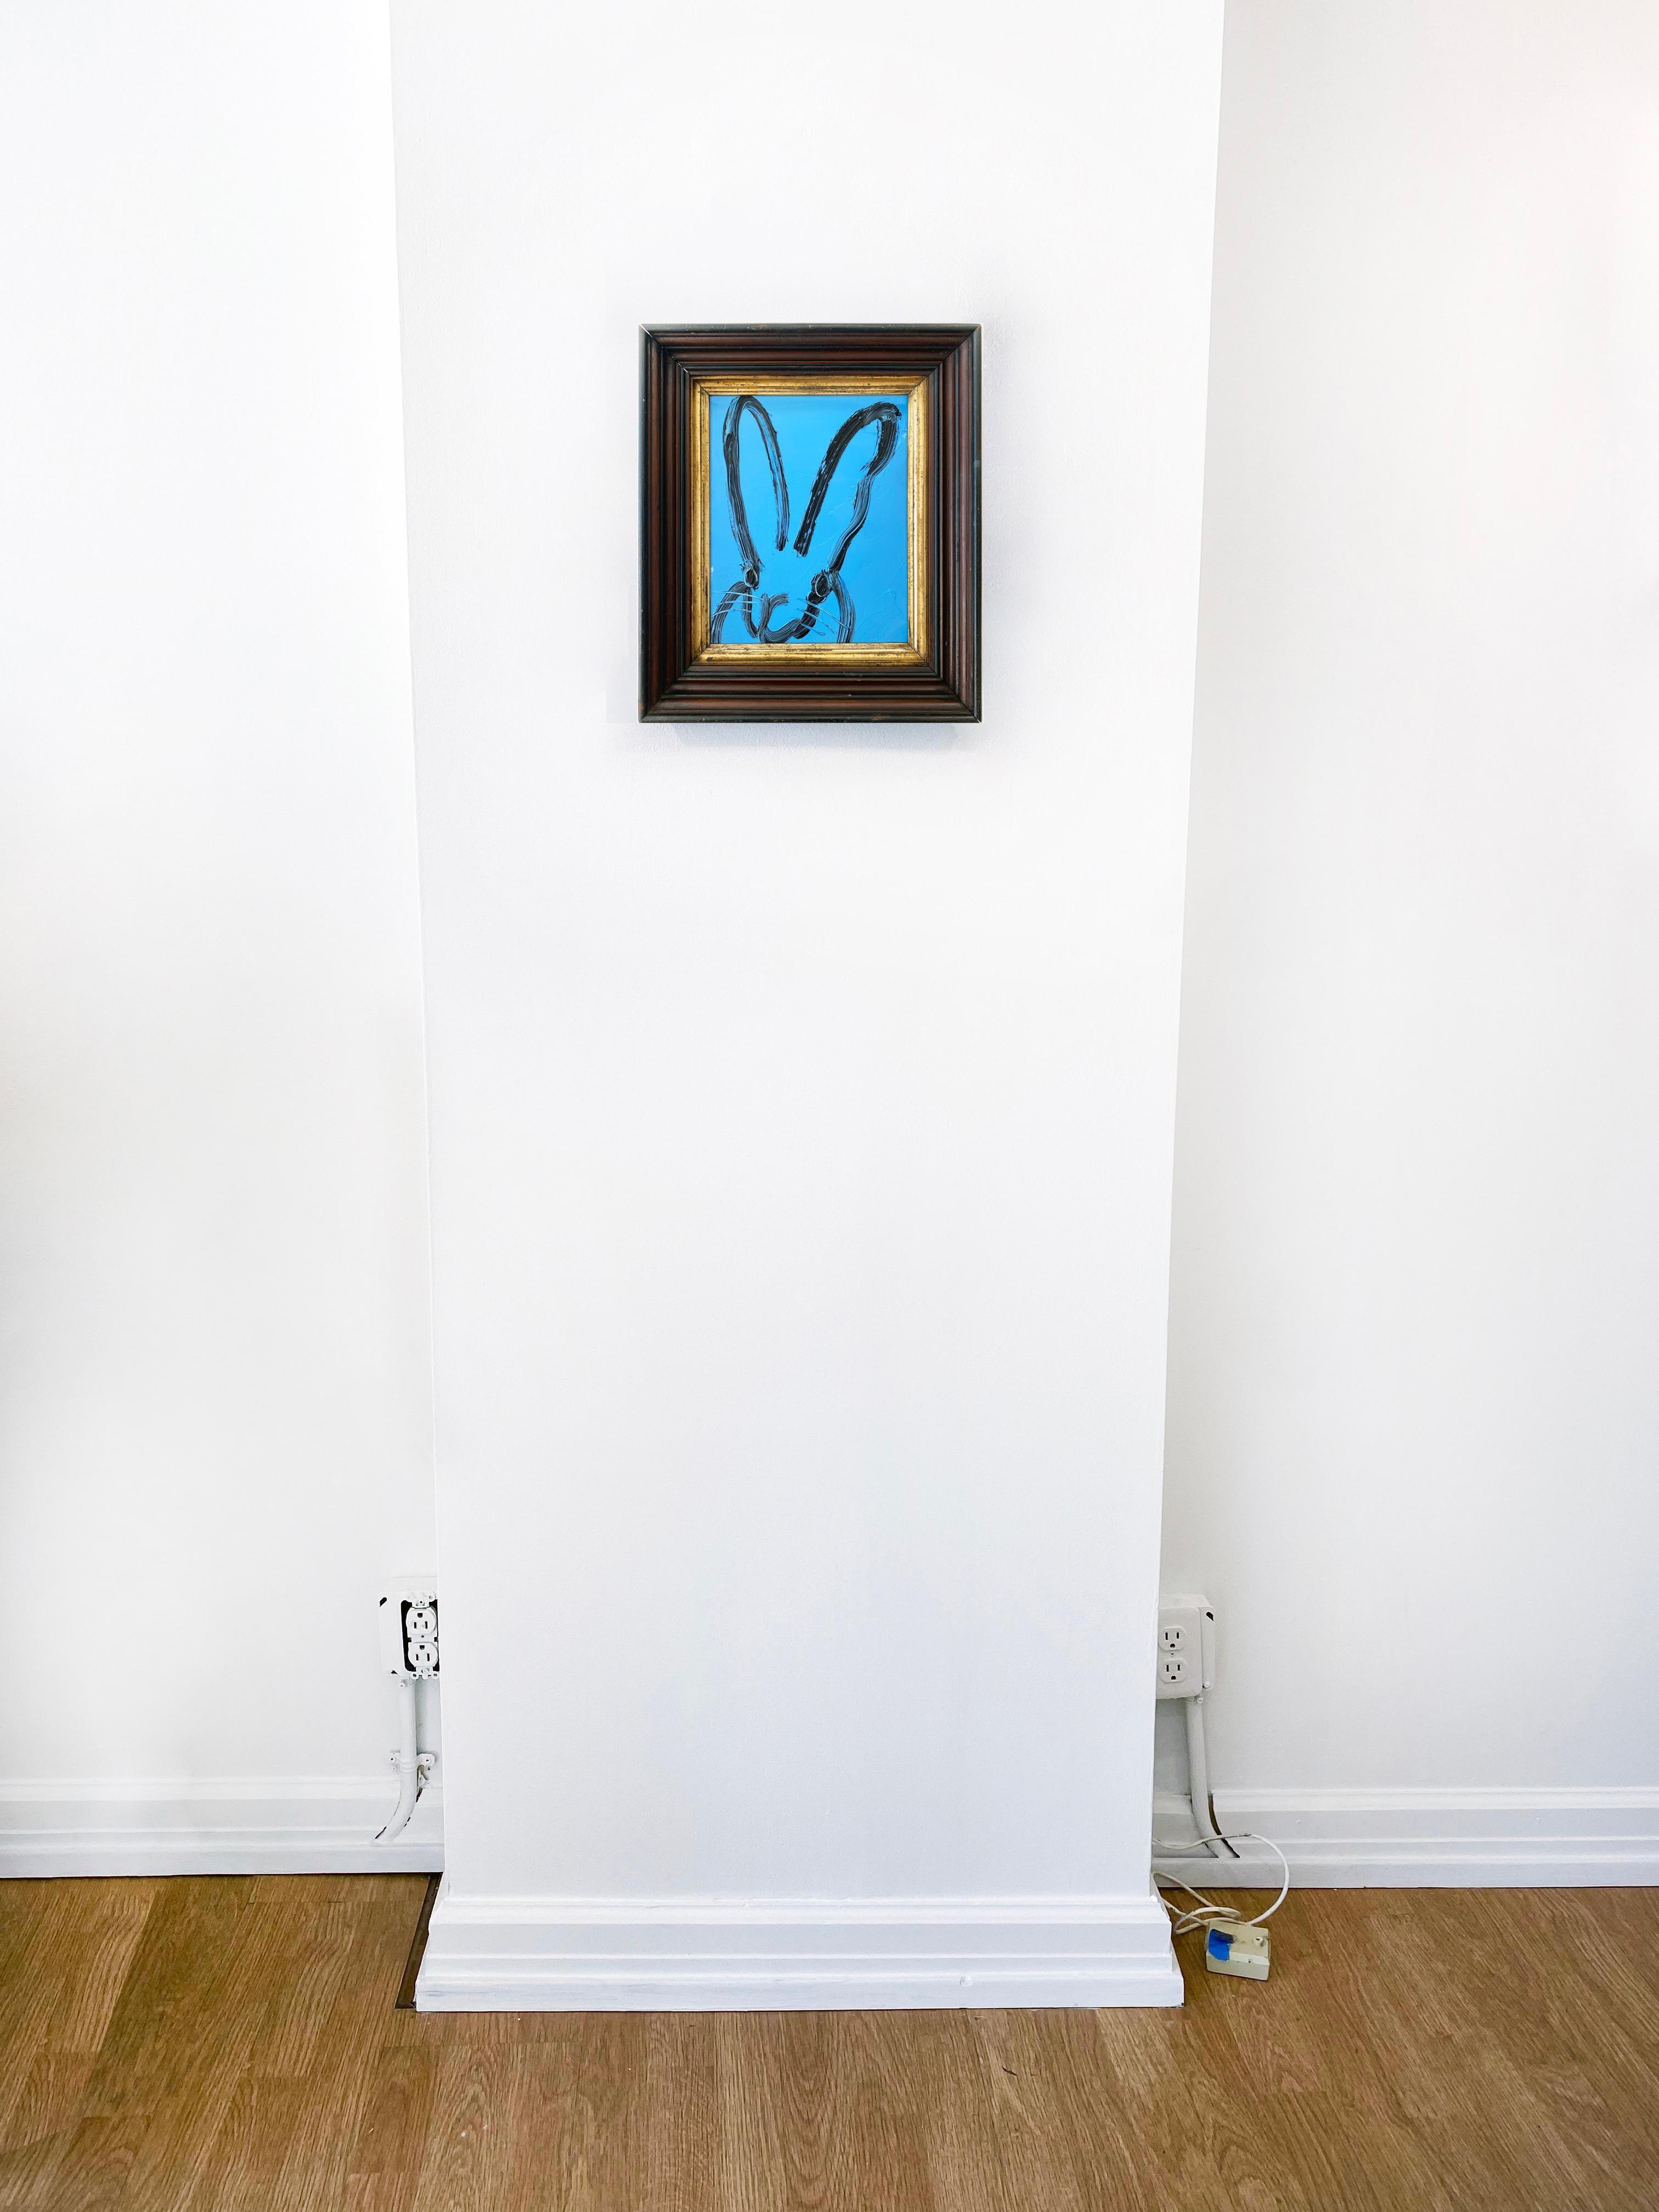 'Blue Tangle 2' by Hunt Slonem, 2021. Oil on wood, 10 x 8 in. Framed size is 14 x 12 in. This painting features Slonem's signature charming bunny outlined in black on a bright blue background. The expressive bunny features long slender ears and